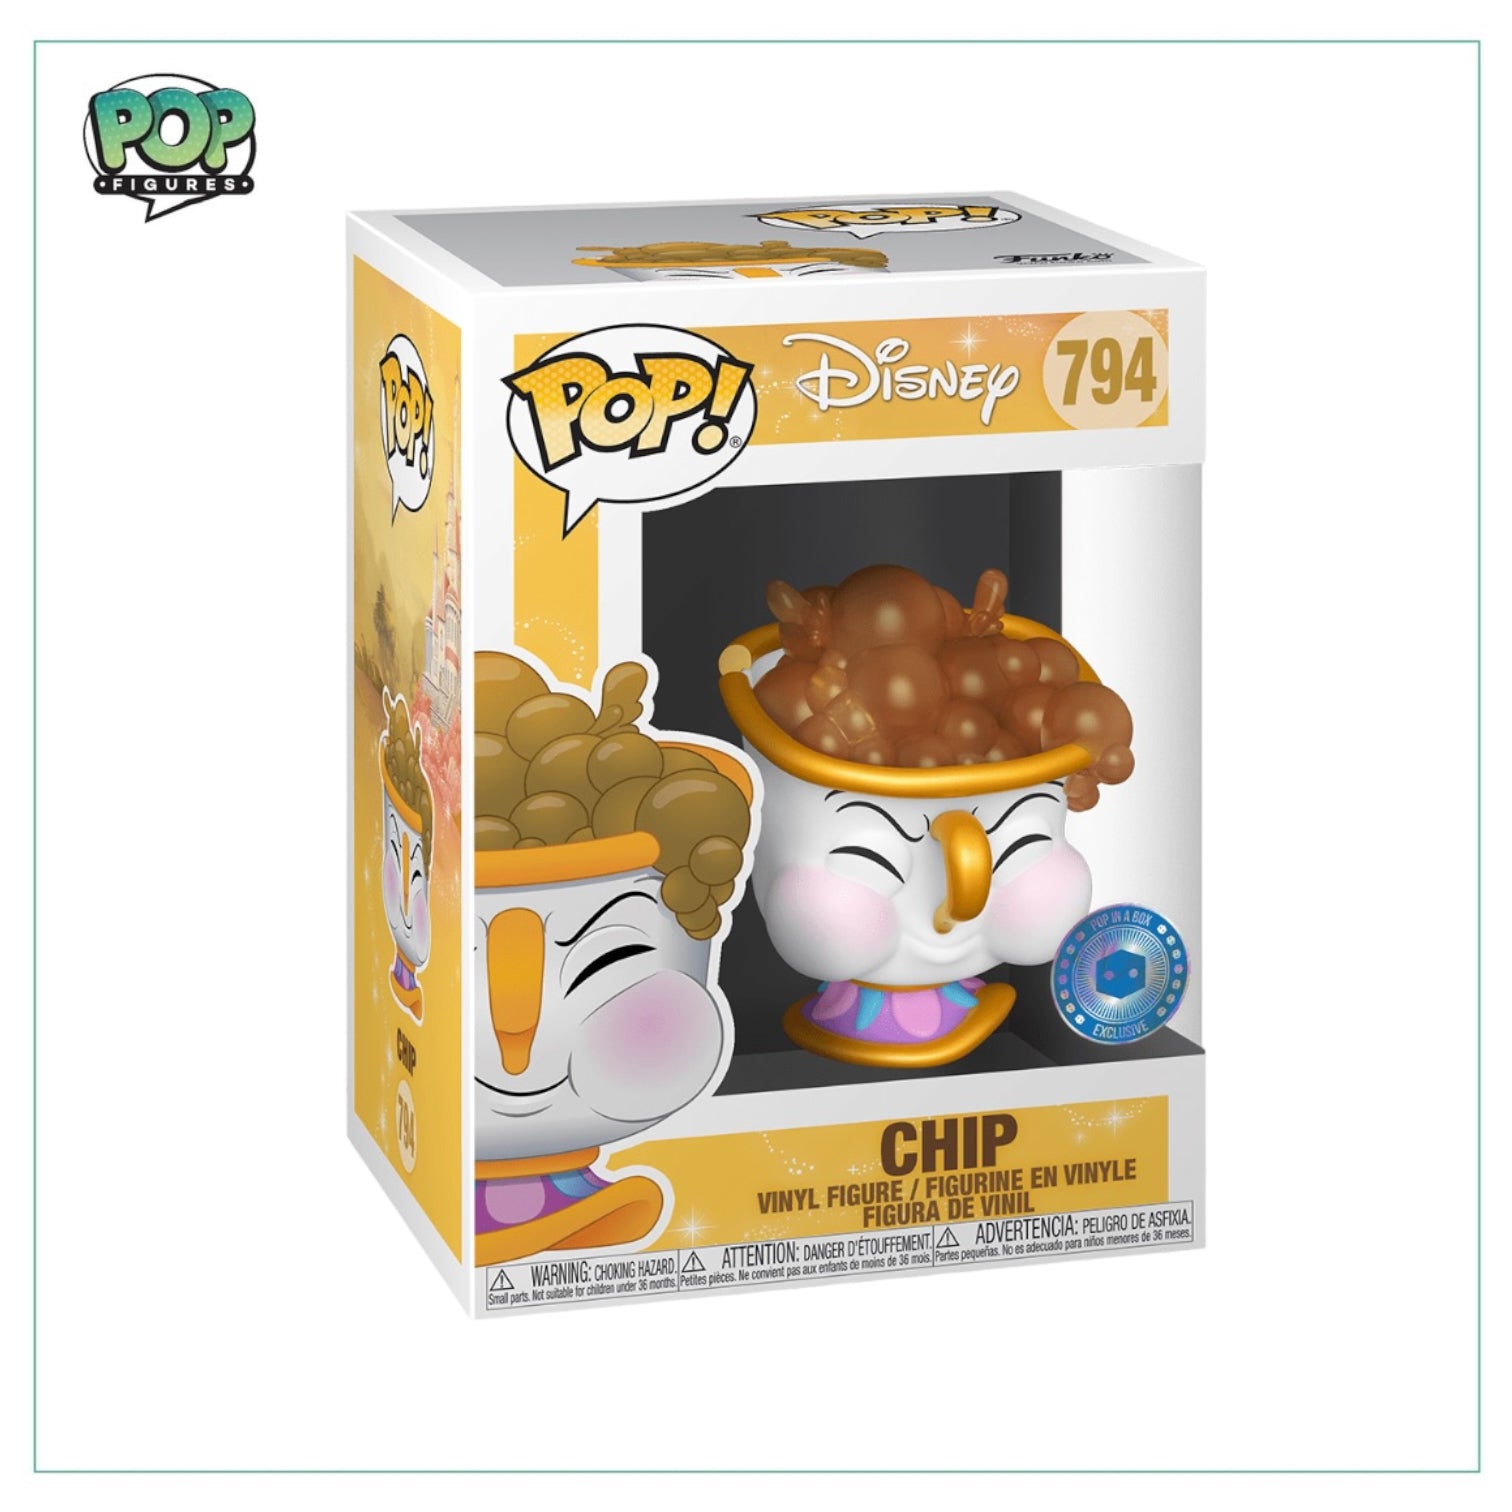 Chip #794 - Beauty and the Beast - Pop in the Box Exclusive